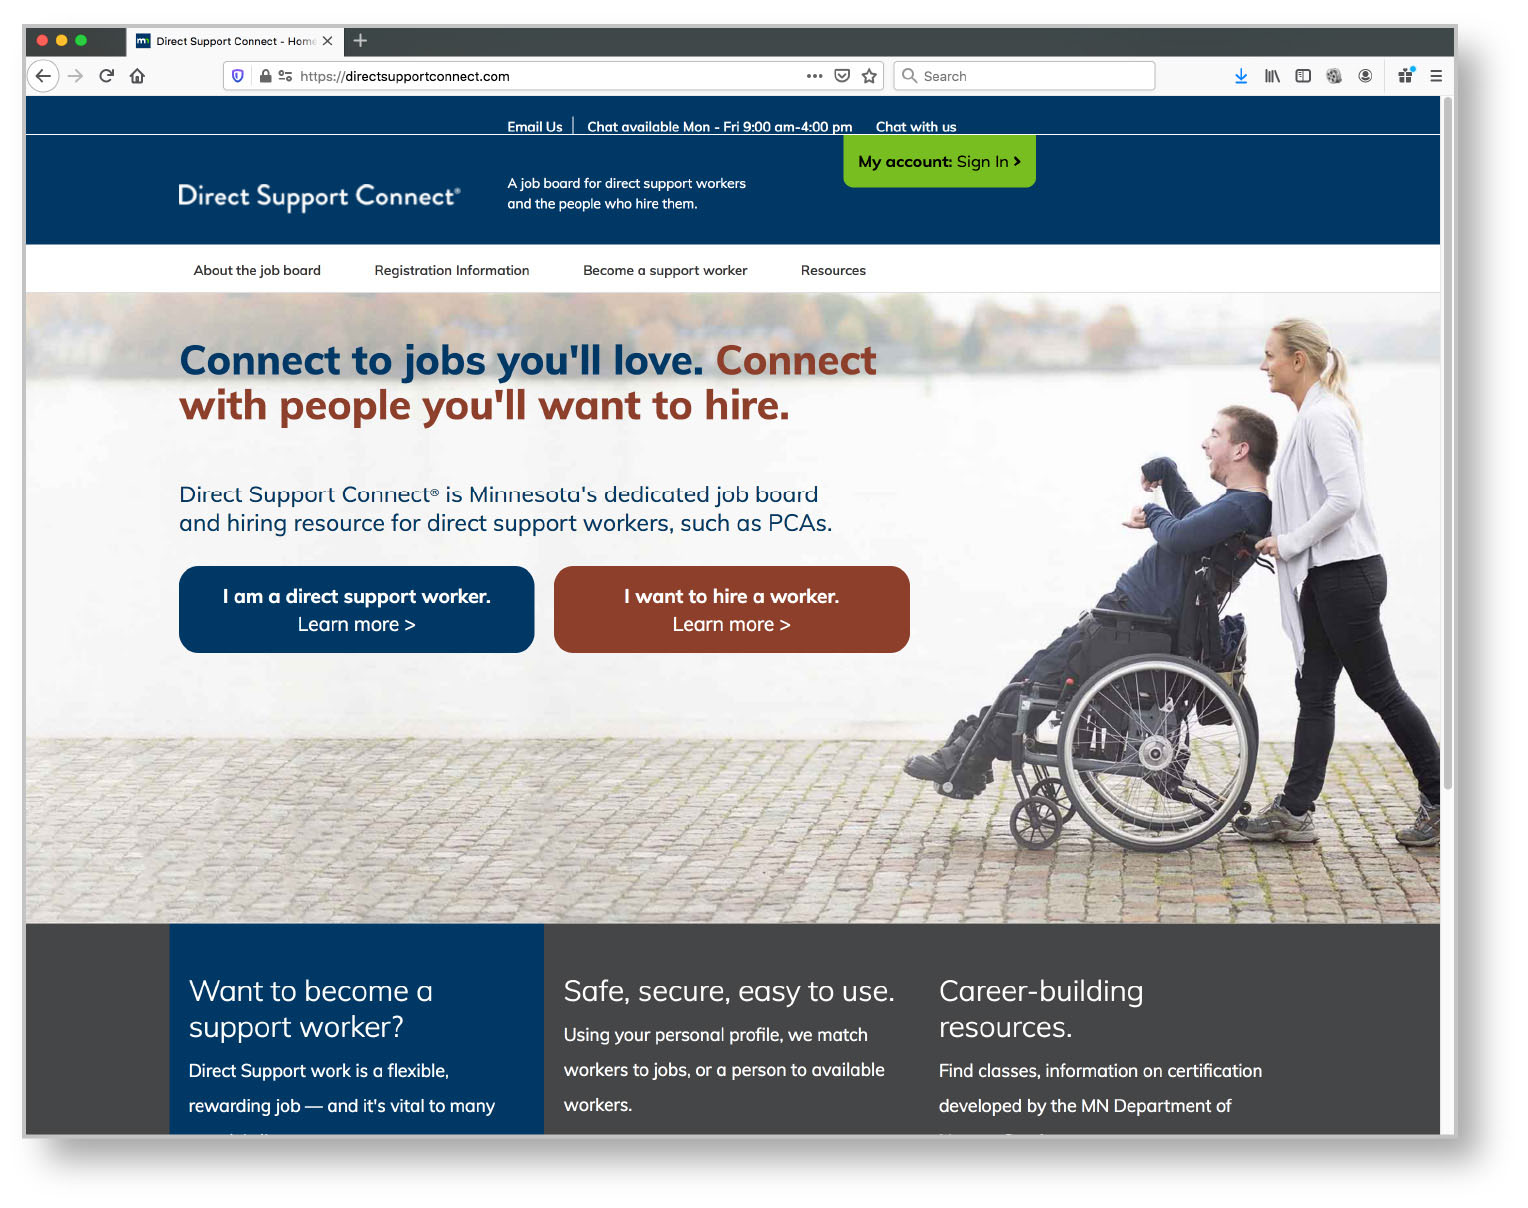 A screenshot of the home page of the Direct Support Connect web page.